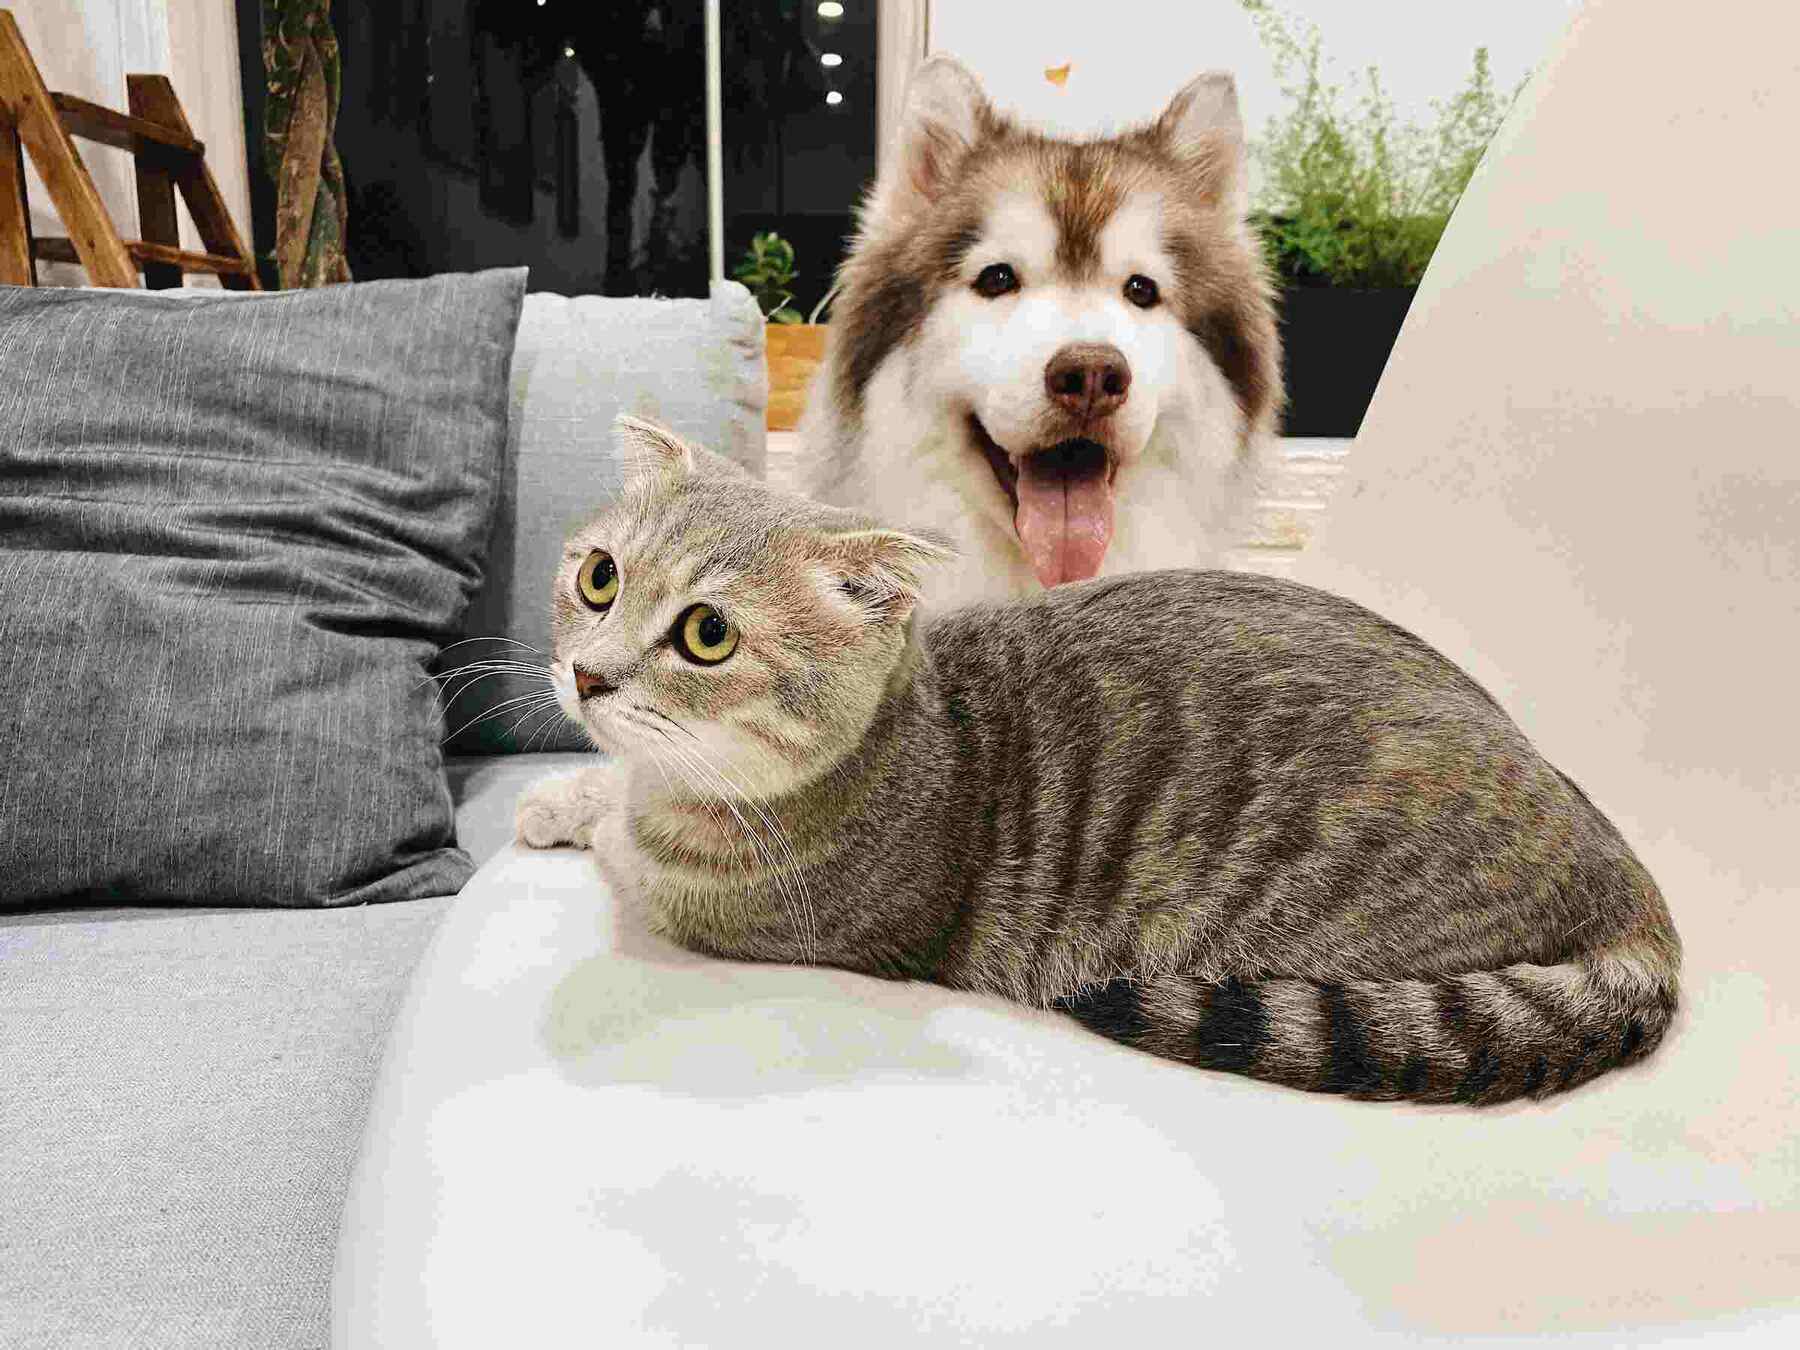 Cat and dog on a couch